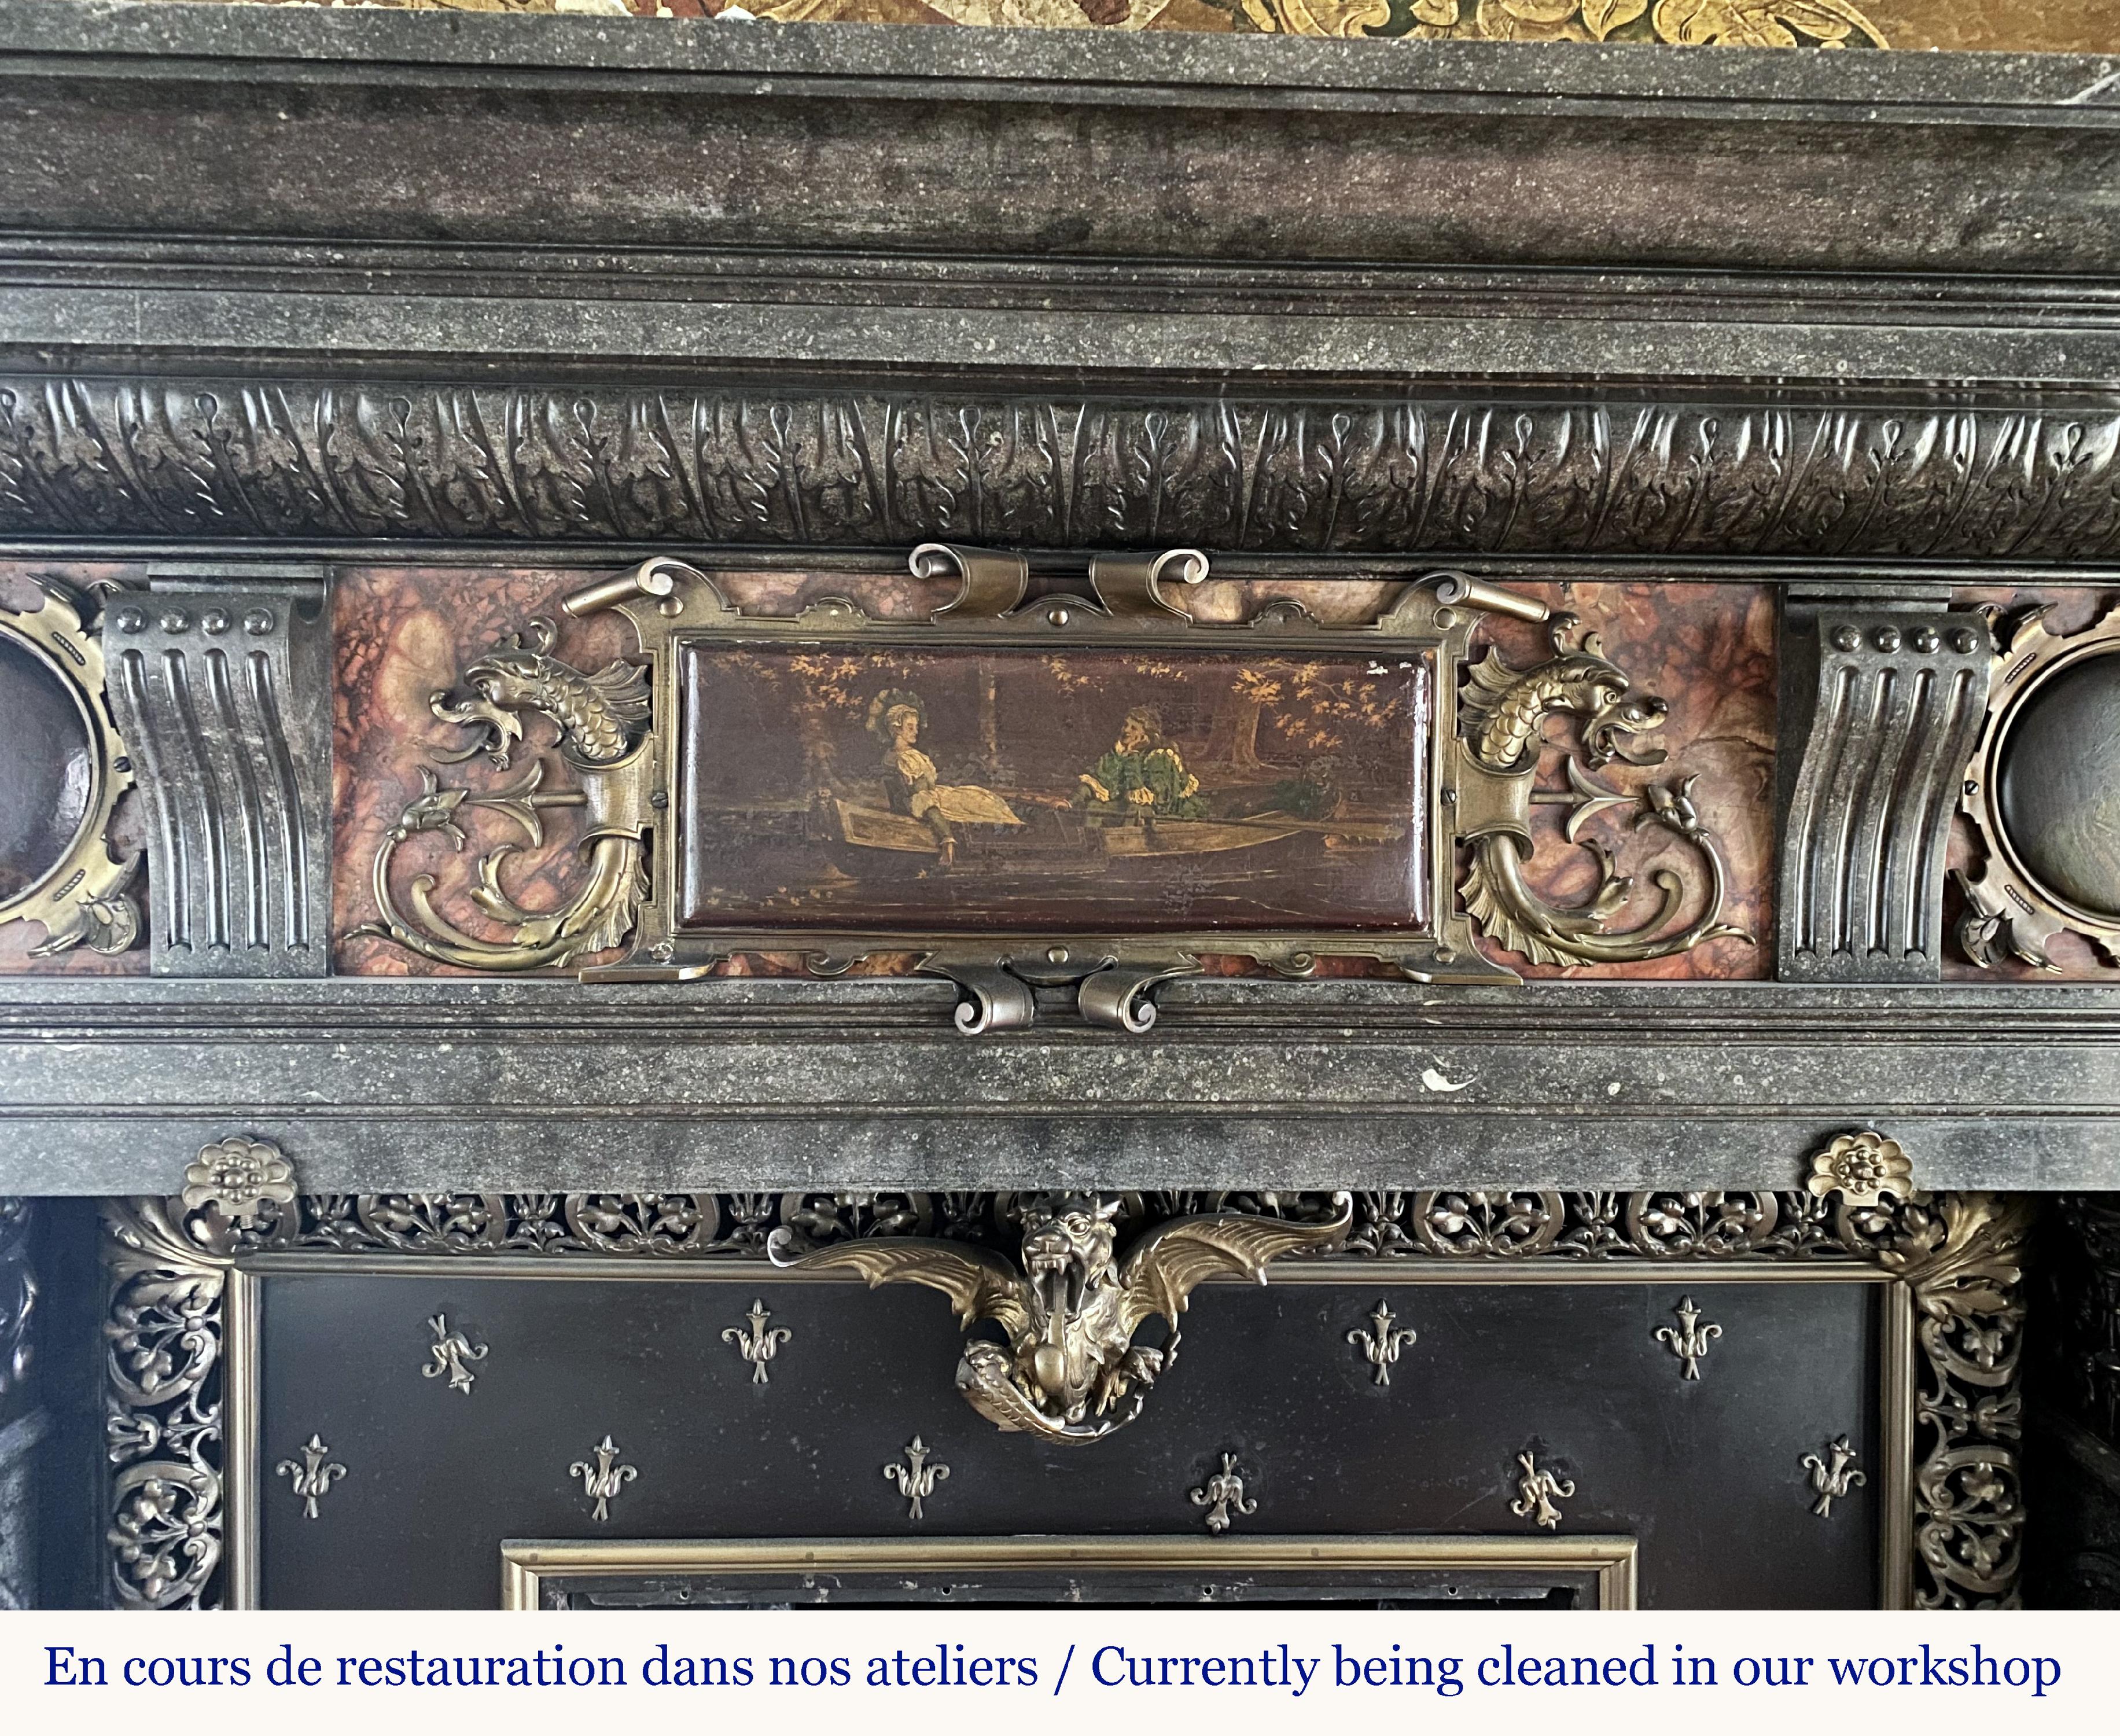 This monumental fireplace was made in Belgian Petit Granit in the second half of the 19th century inspired by the Flemish Renaissance art answering the revival vogue of this period.
Our fireplace shows a very rich sculpted decor and gilt bronze